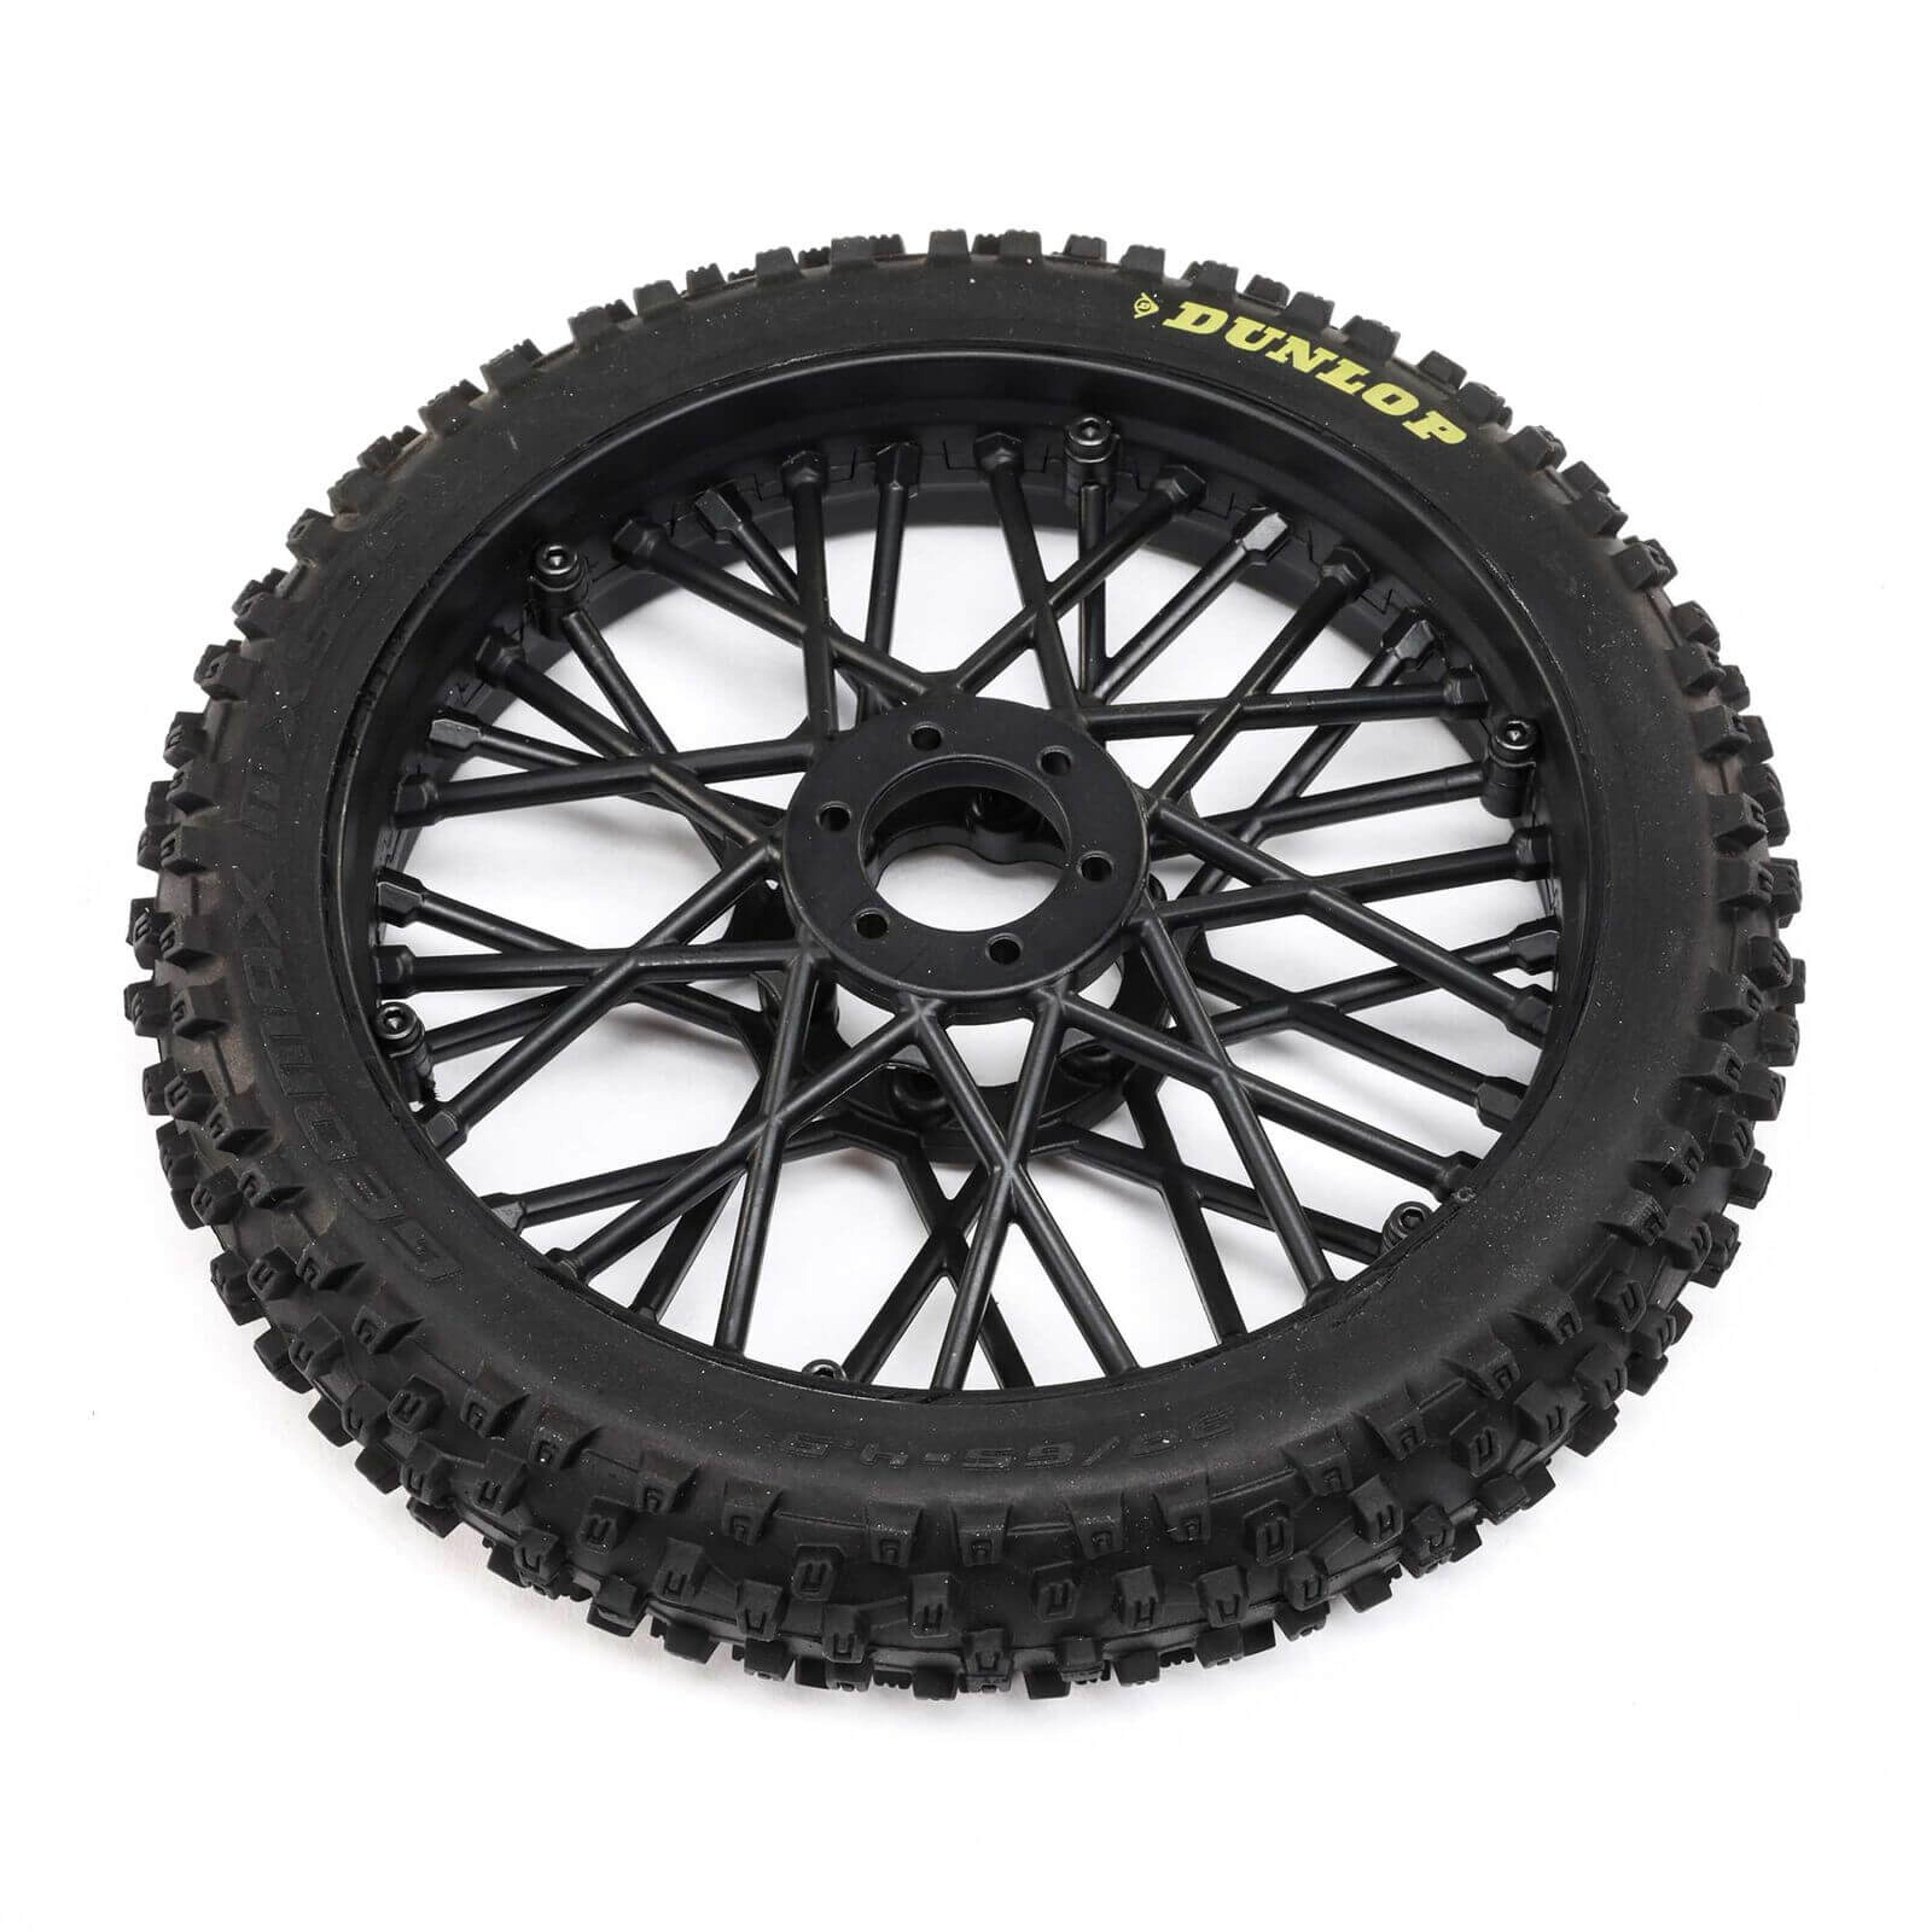 Dunlop MX53 Front Tire Mounted: Promoto-MX